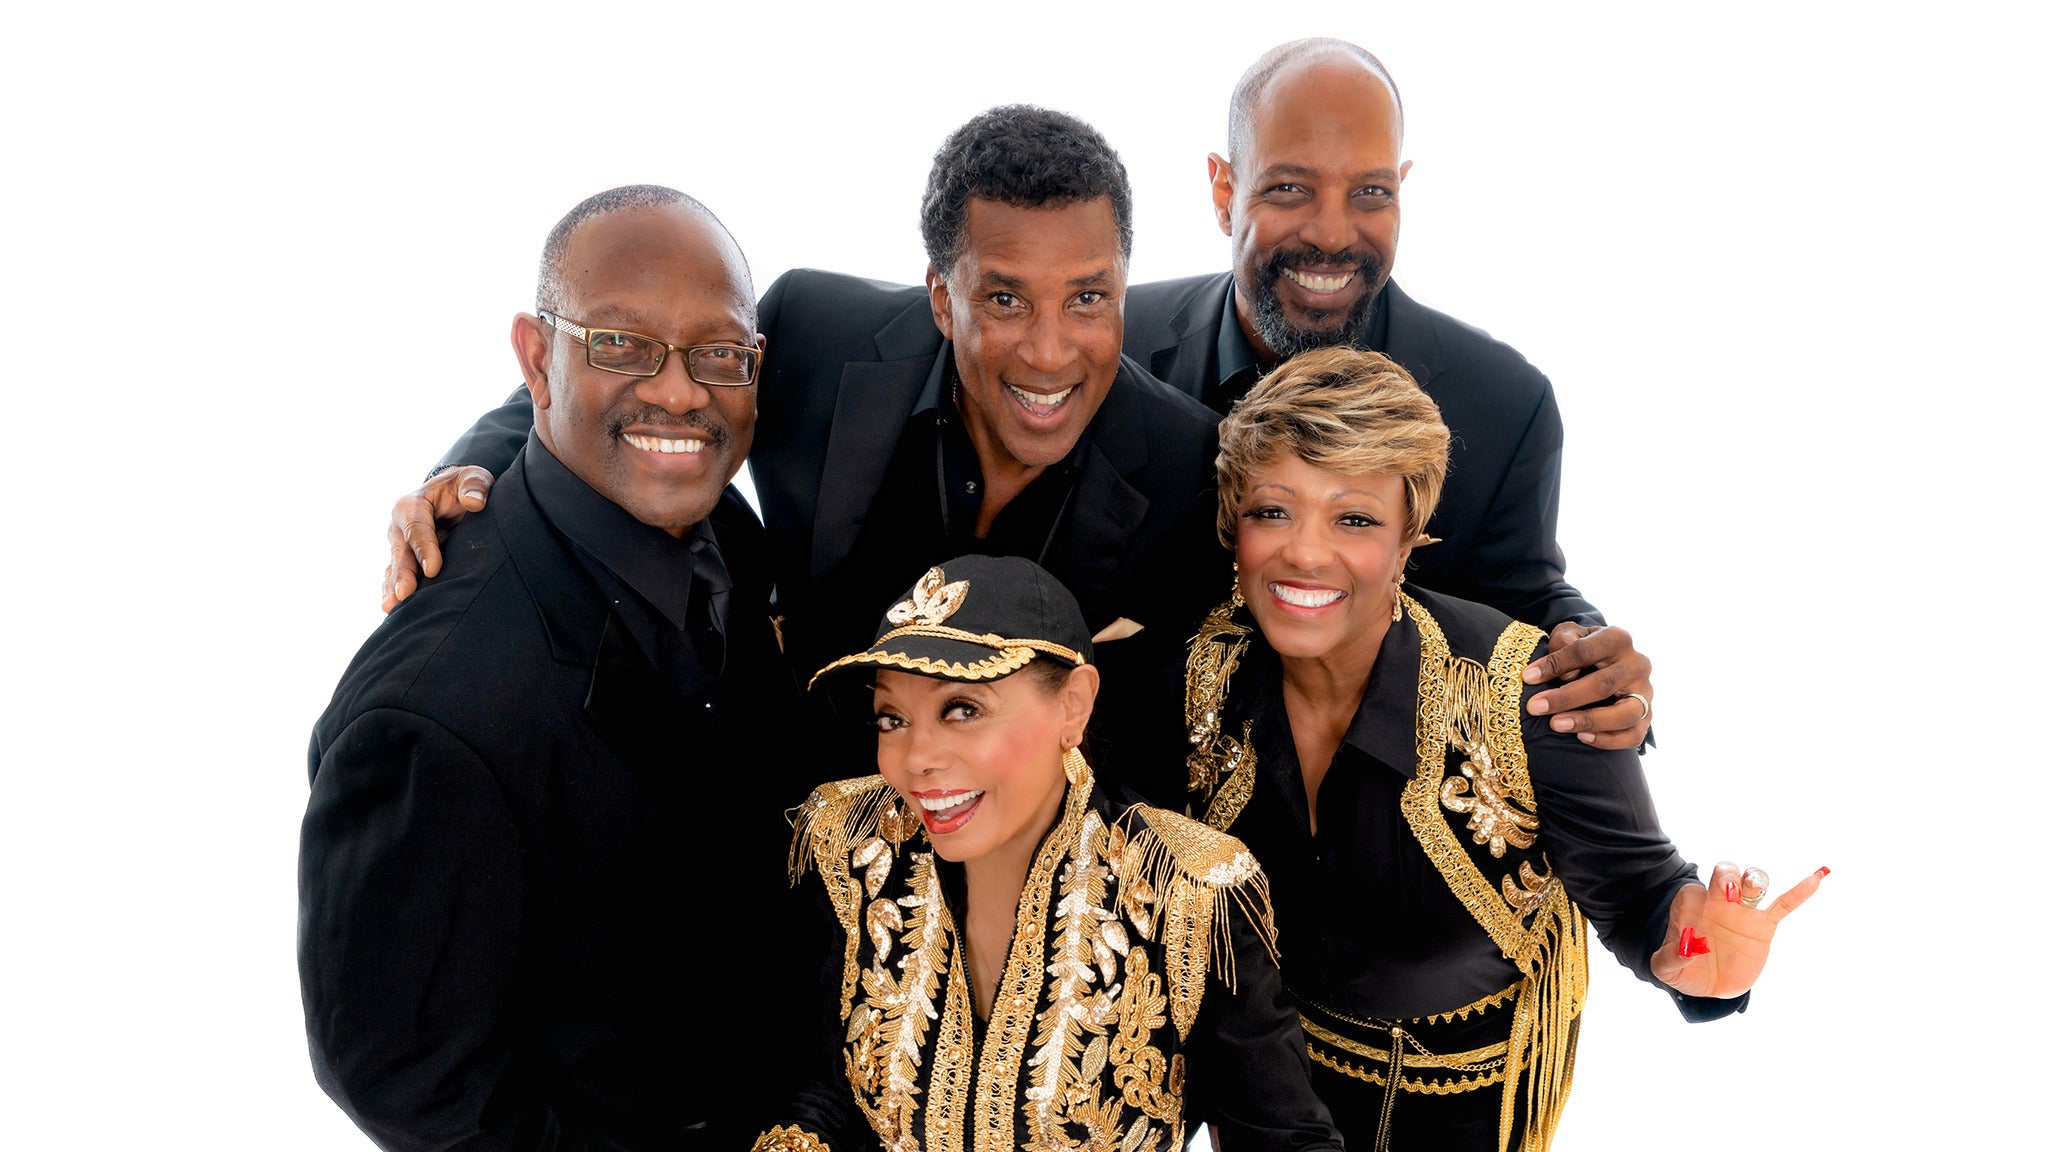 The 5th Dimension at The Barns at Wolf Trap